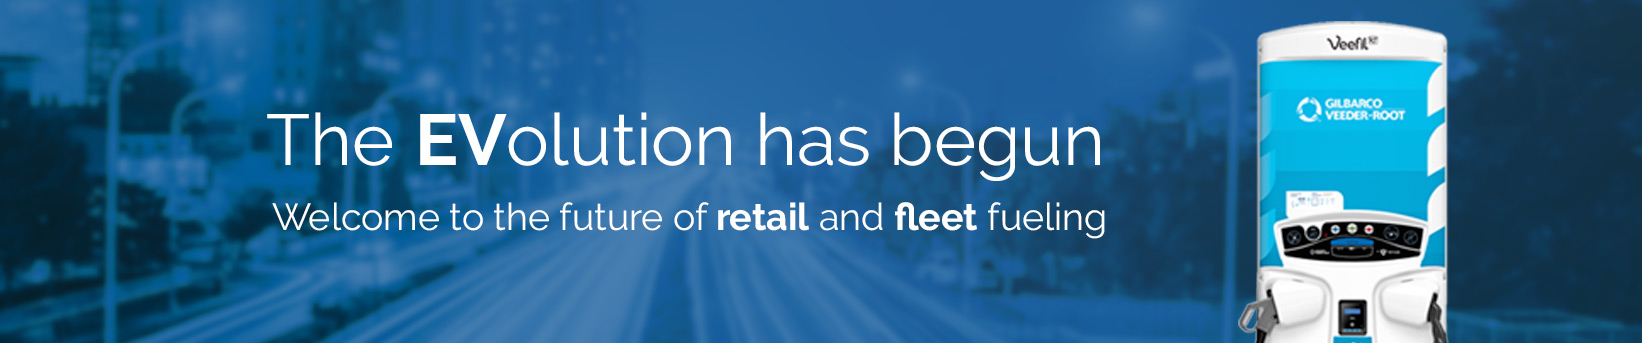 The EVolution has begun. Welcome to the future of retail and fleet fueling